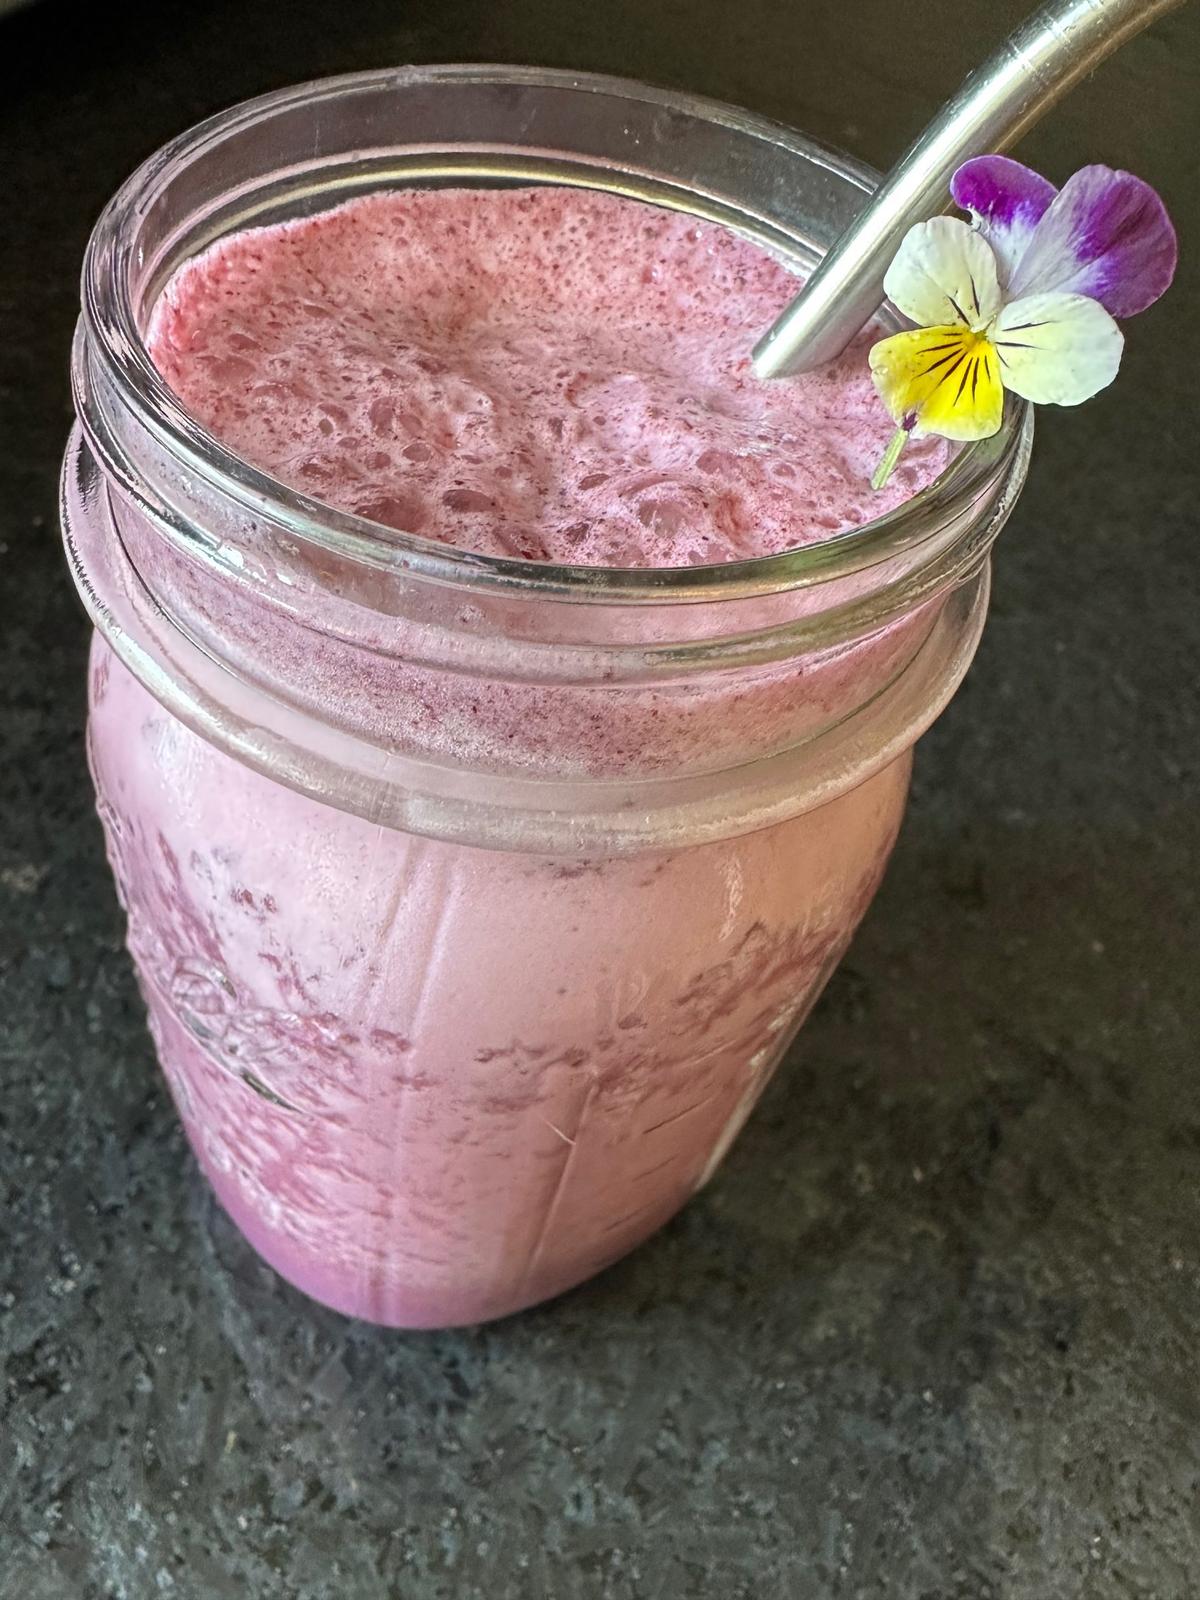 A berry milkshake is a glorious way to cope with the heat of summer. (Ari LeVaux)